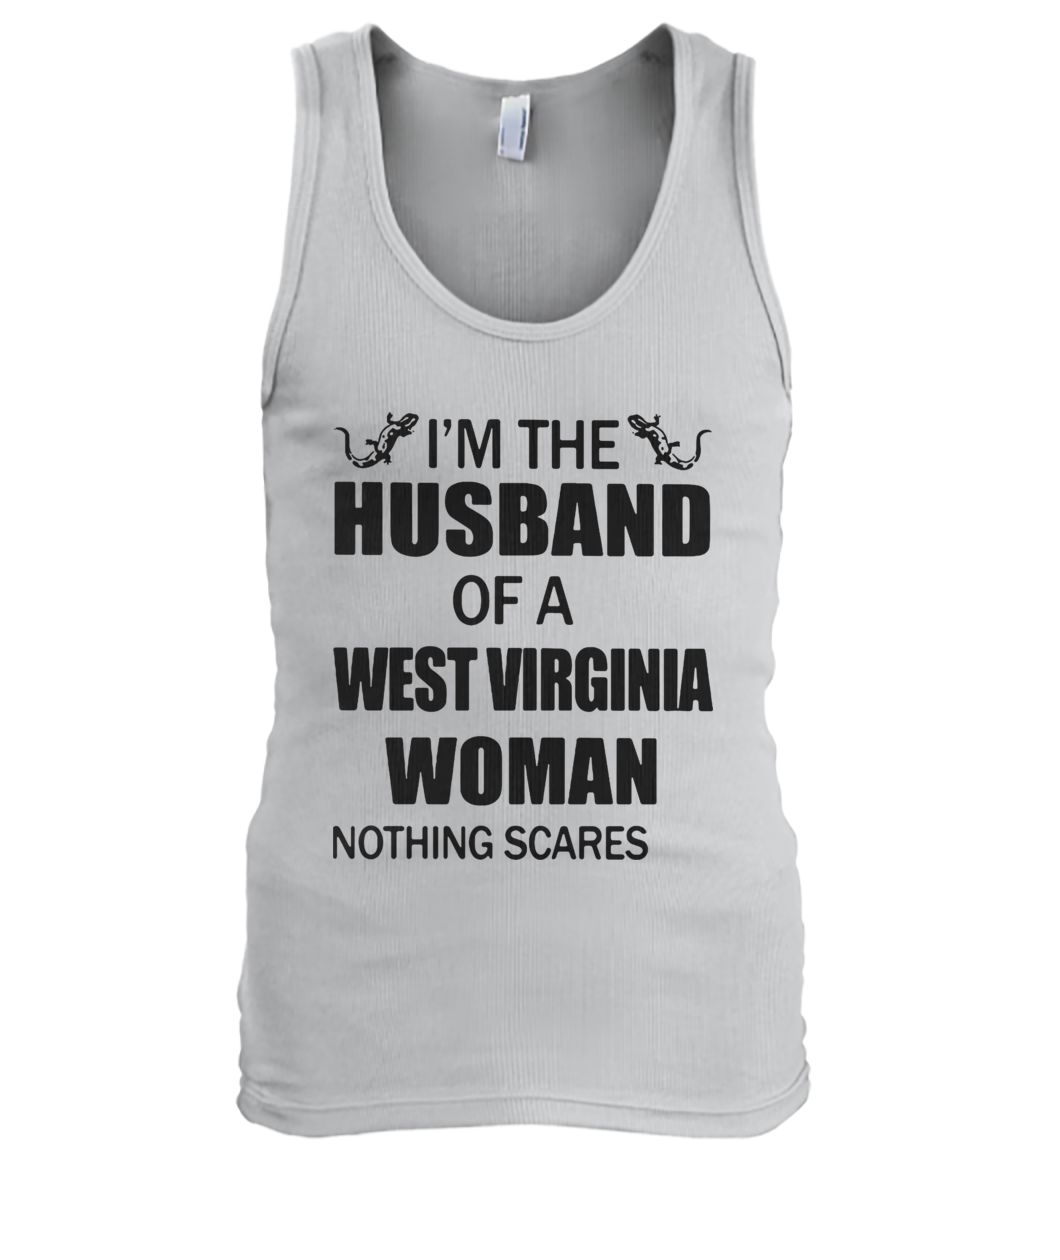 I'm the husband of a west virginia woman nothing scares me men's tank top